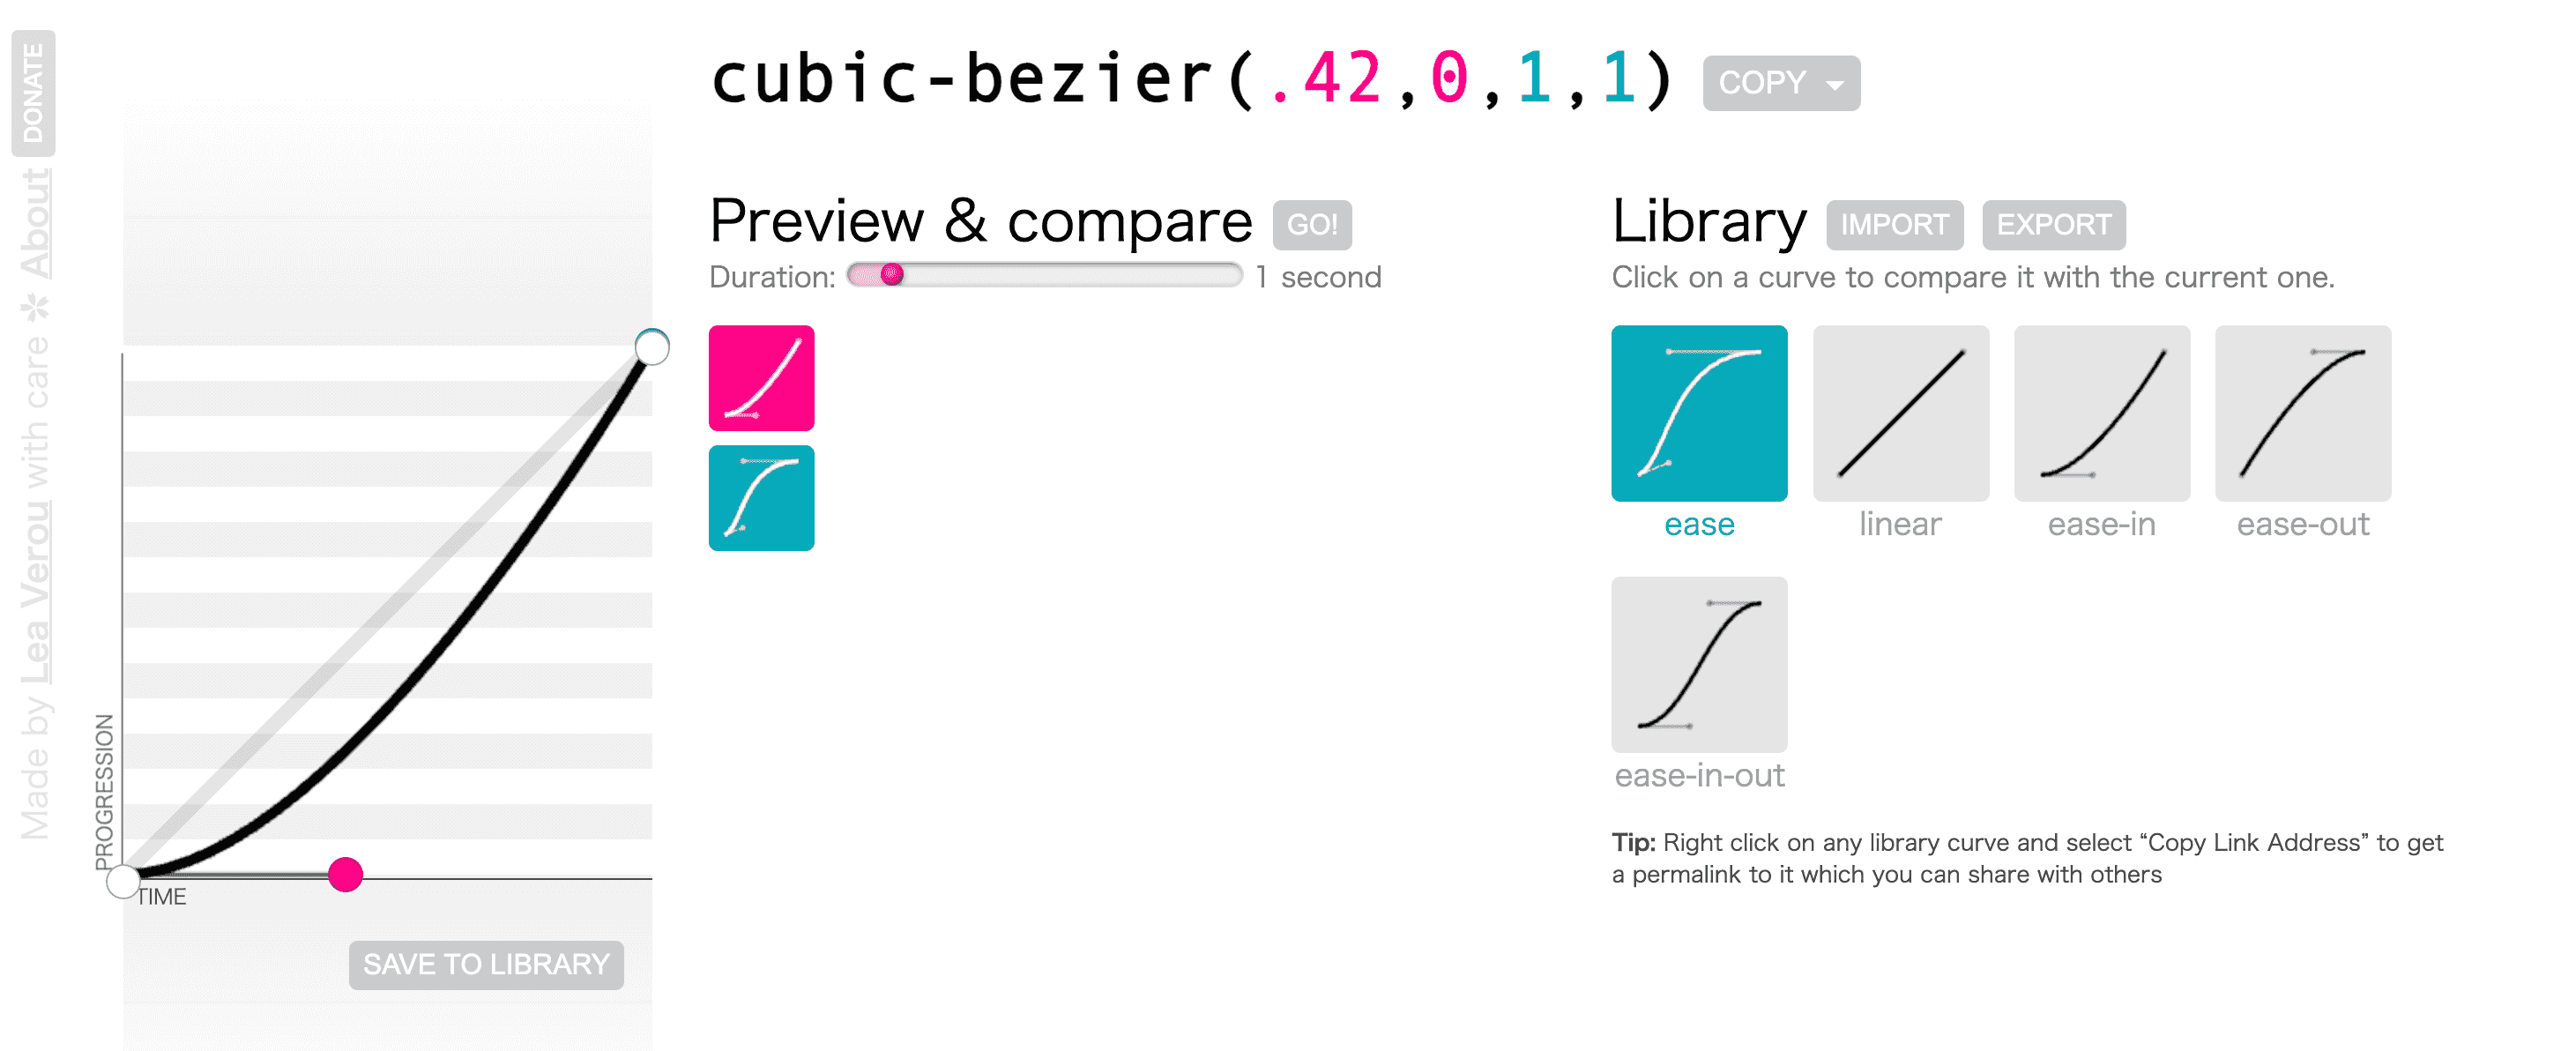 transition ease in cubic bezier curve